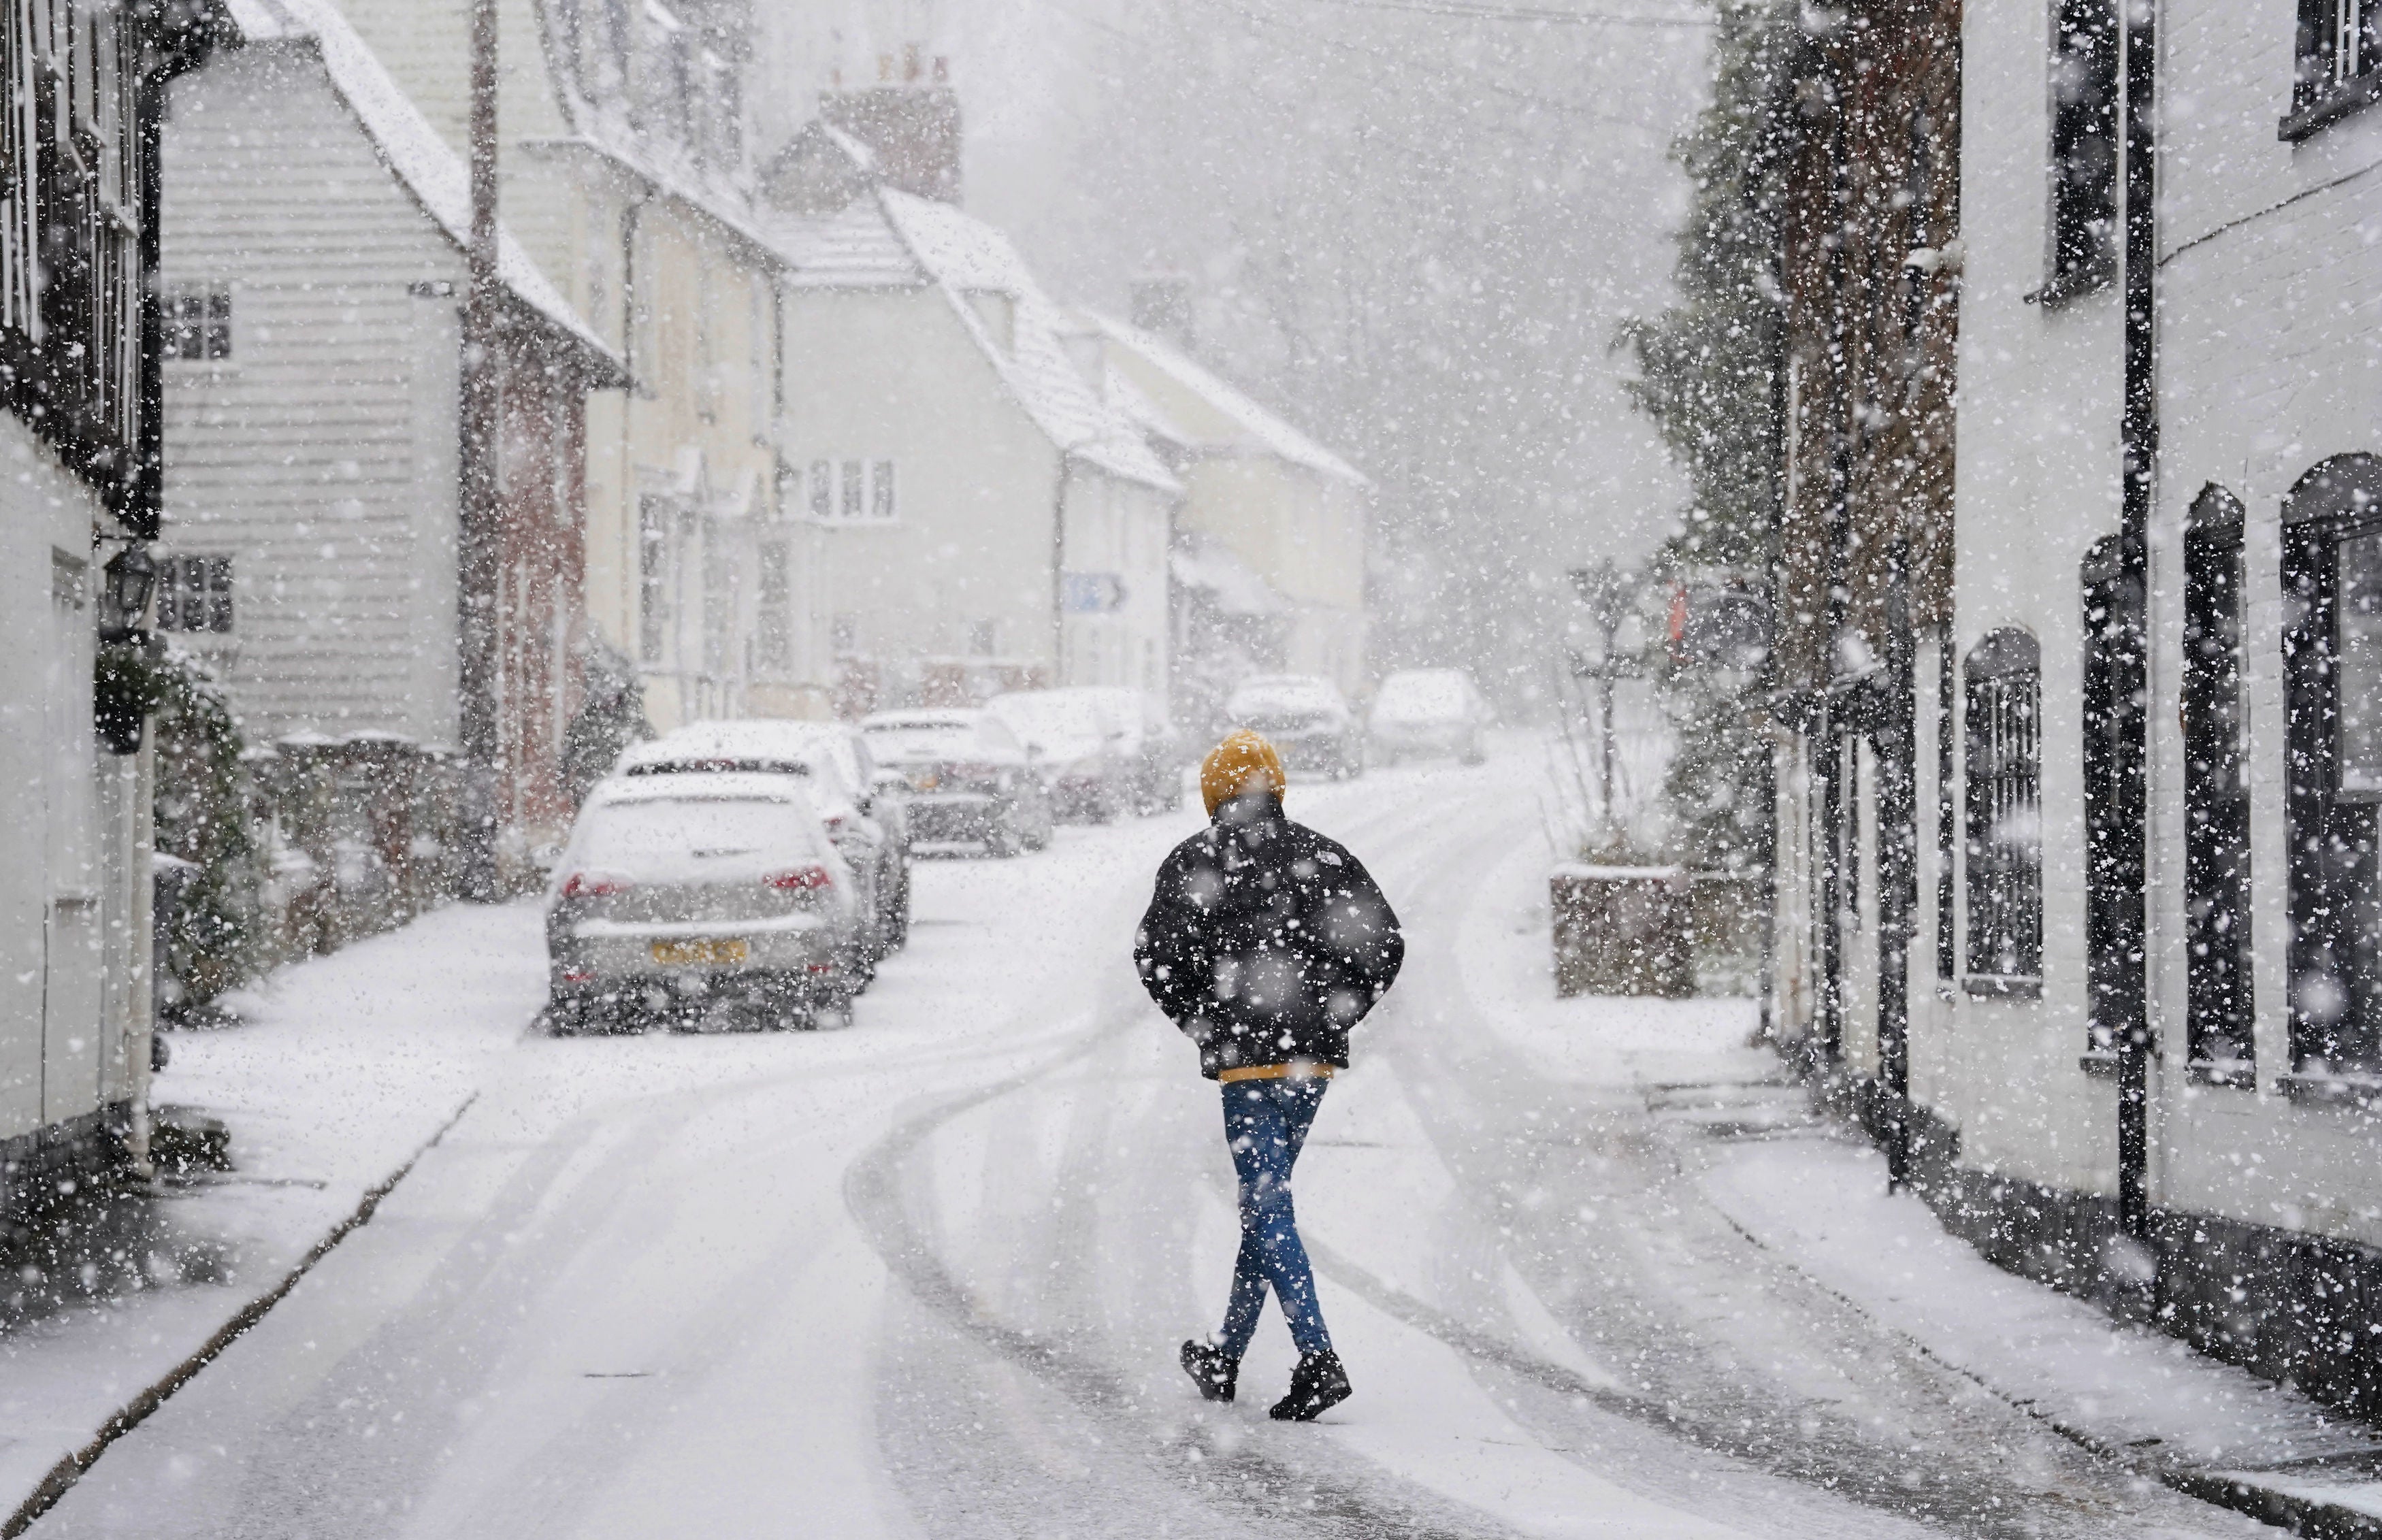 A person walking through a snow flurry in Lenham, Kent. Sleet and snow showers battered the UK on Monday